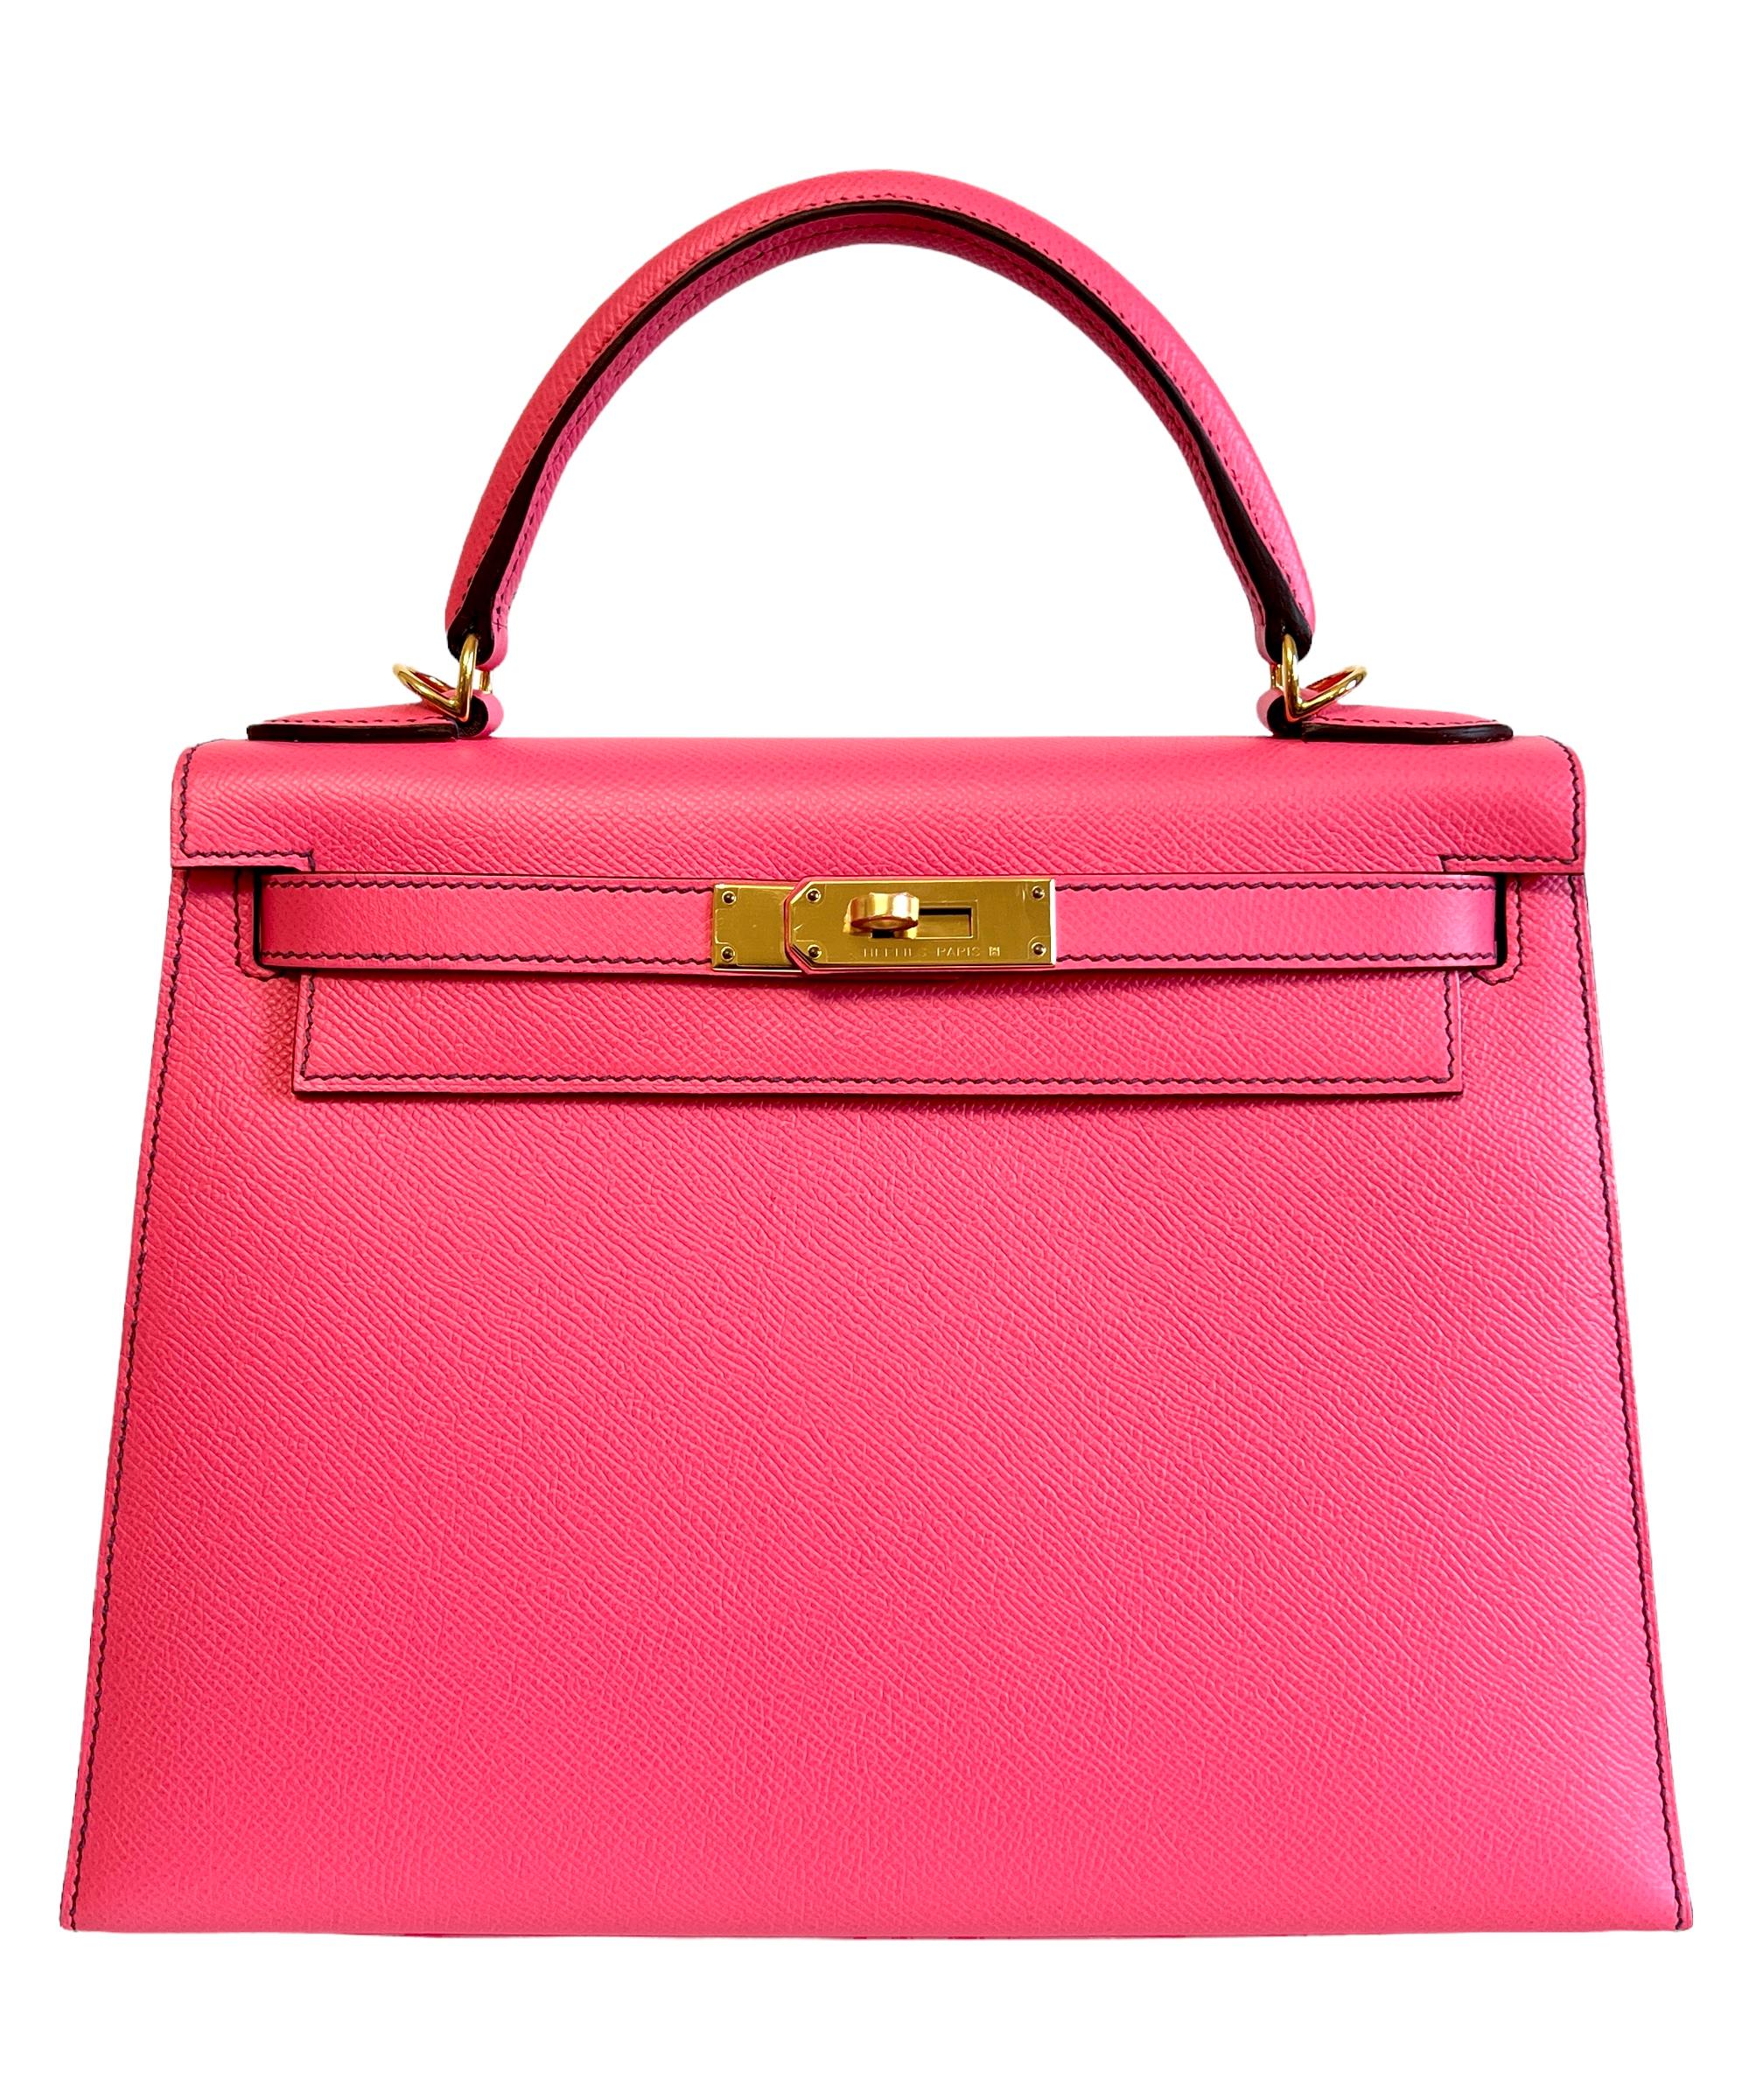 Stunning 1 of 1 HSS Special Order Hermes Kelly 28 Sellier Rose Azalee  Pink with beautiful Purple Contrast Stitching and Purple Interior. Complimented by Gold Hardware. Like new with Plastic on all Hardware.

Shop with confidence from Lux Addicts.